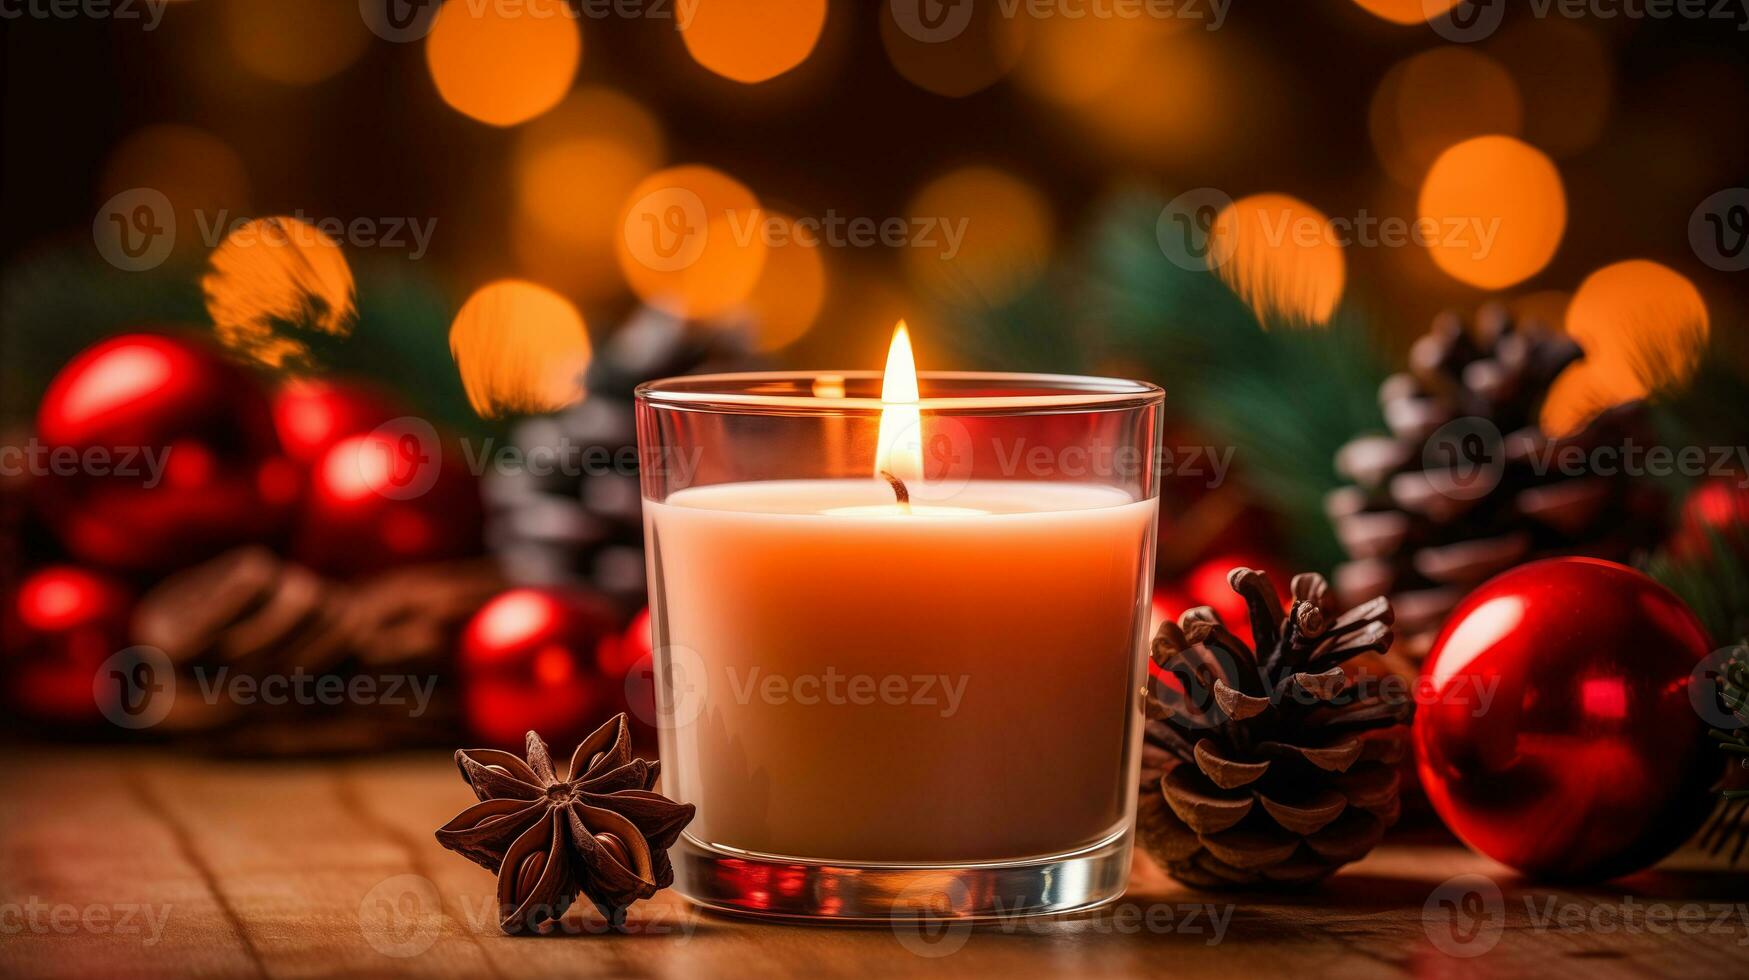 Christmas candles and ball decorations light the background. Paper for gift boxes prepared for holiday celebrations. photo